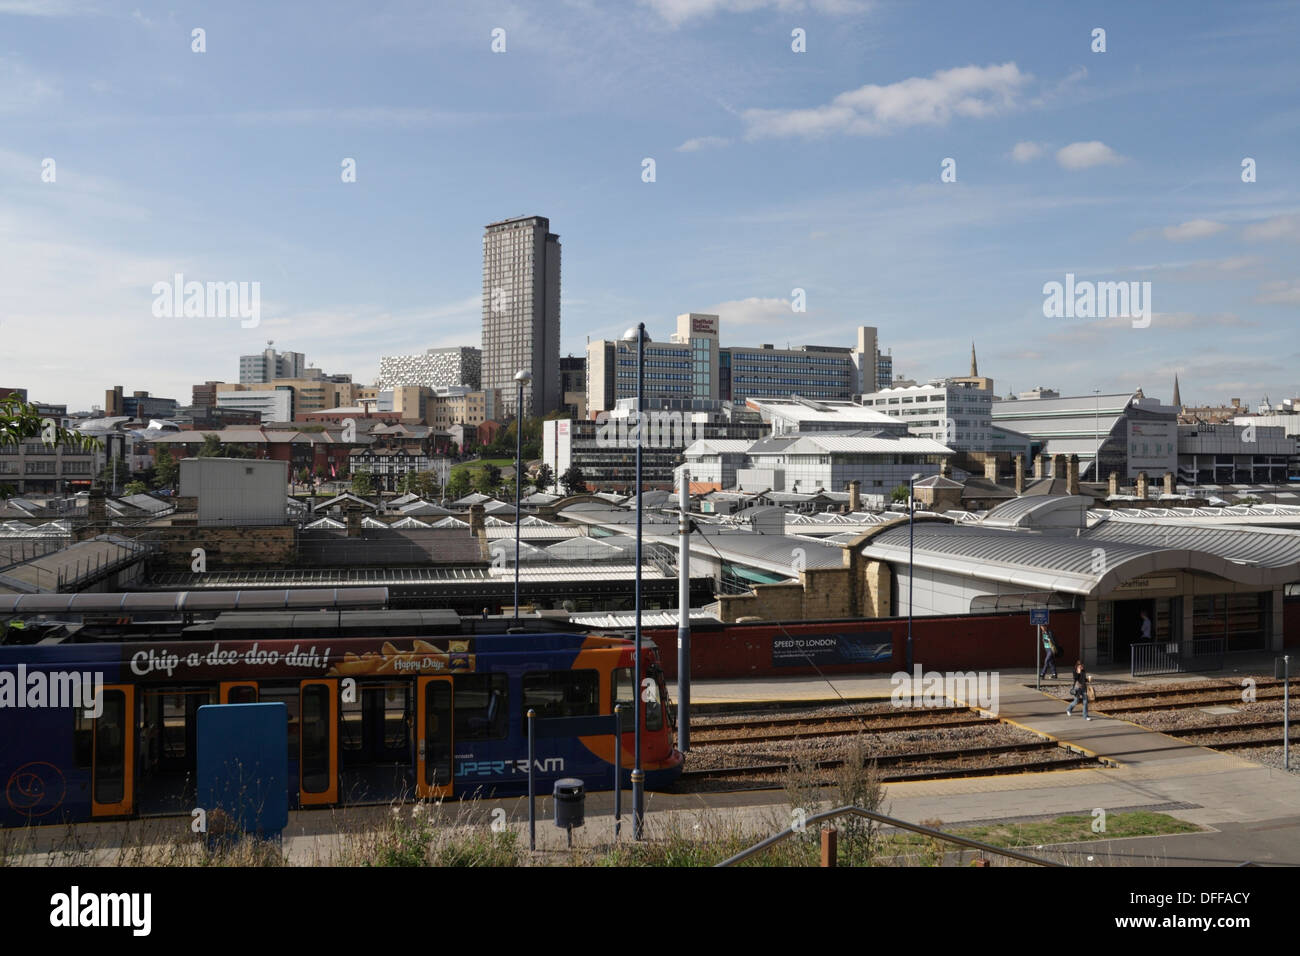 Sheffield City centre skyline with Super Tram and Station, urban inner sity cityscape Stock Photo